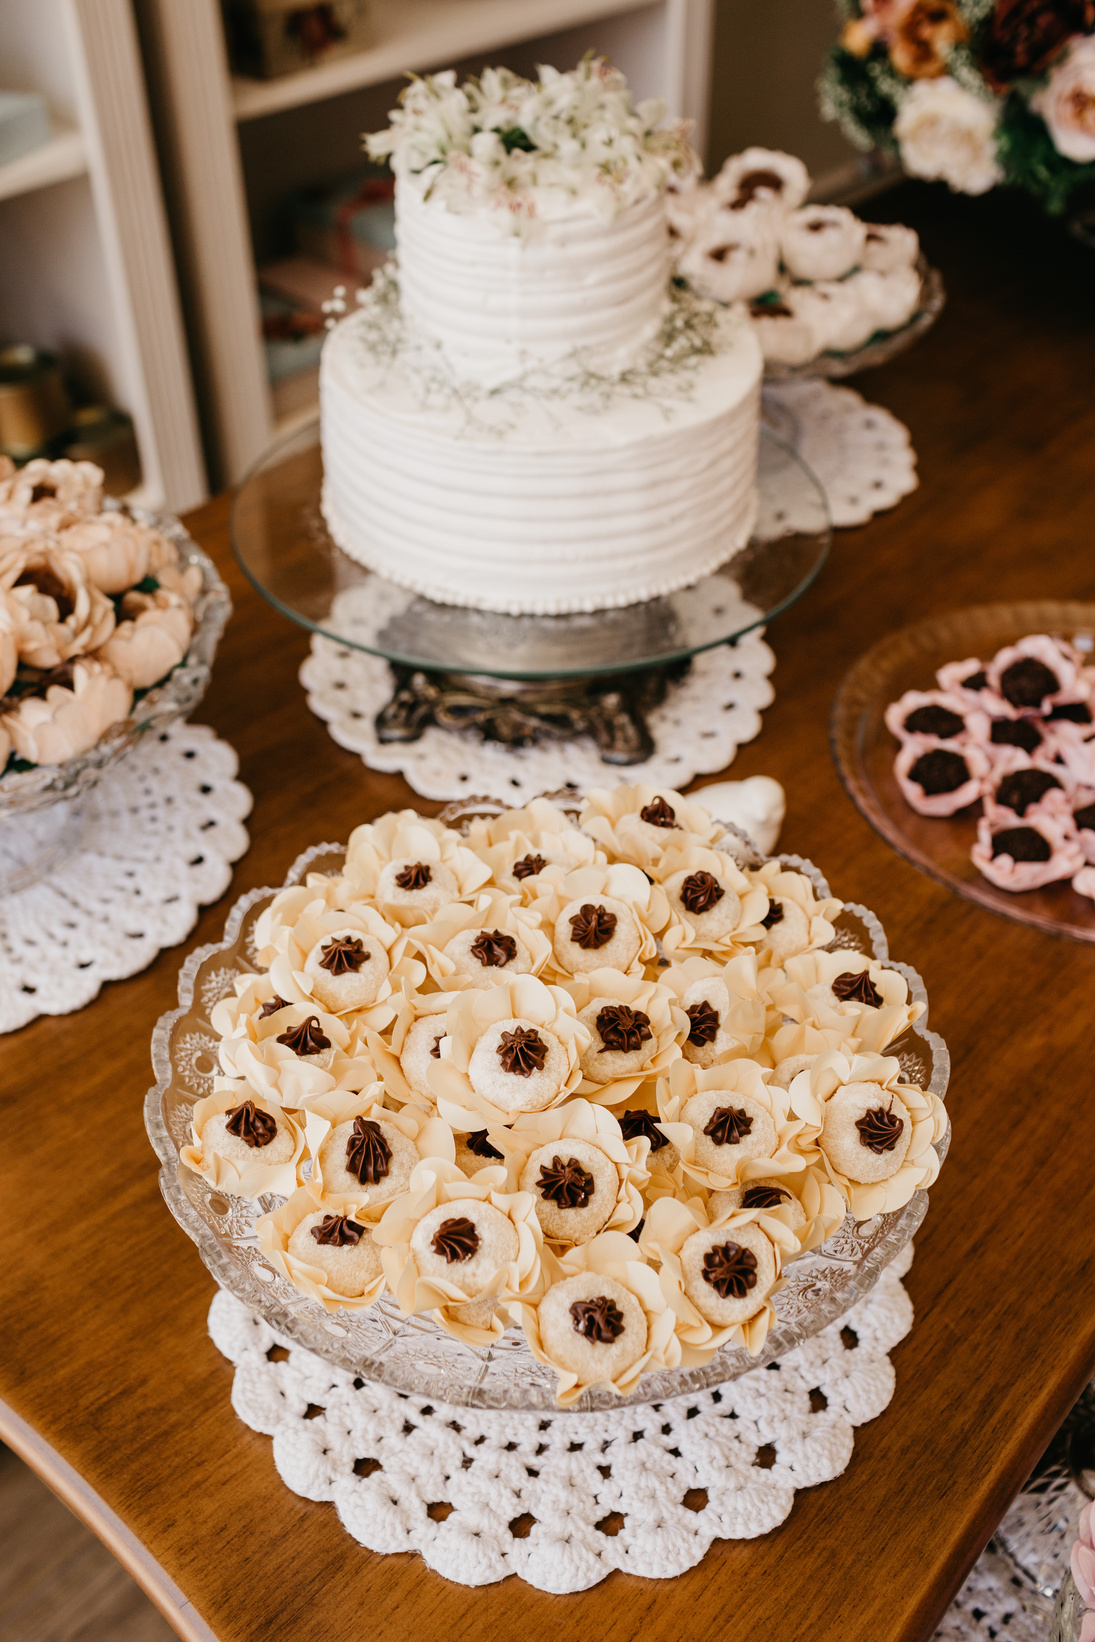 Wedding cake and delicious biscuits on table indoors